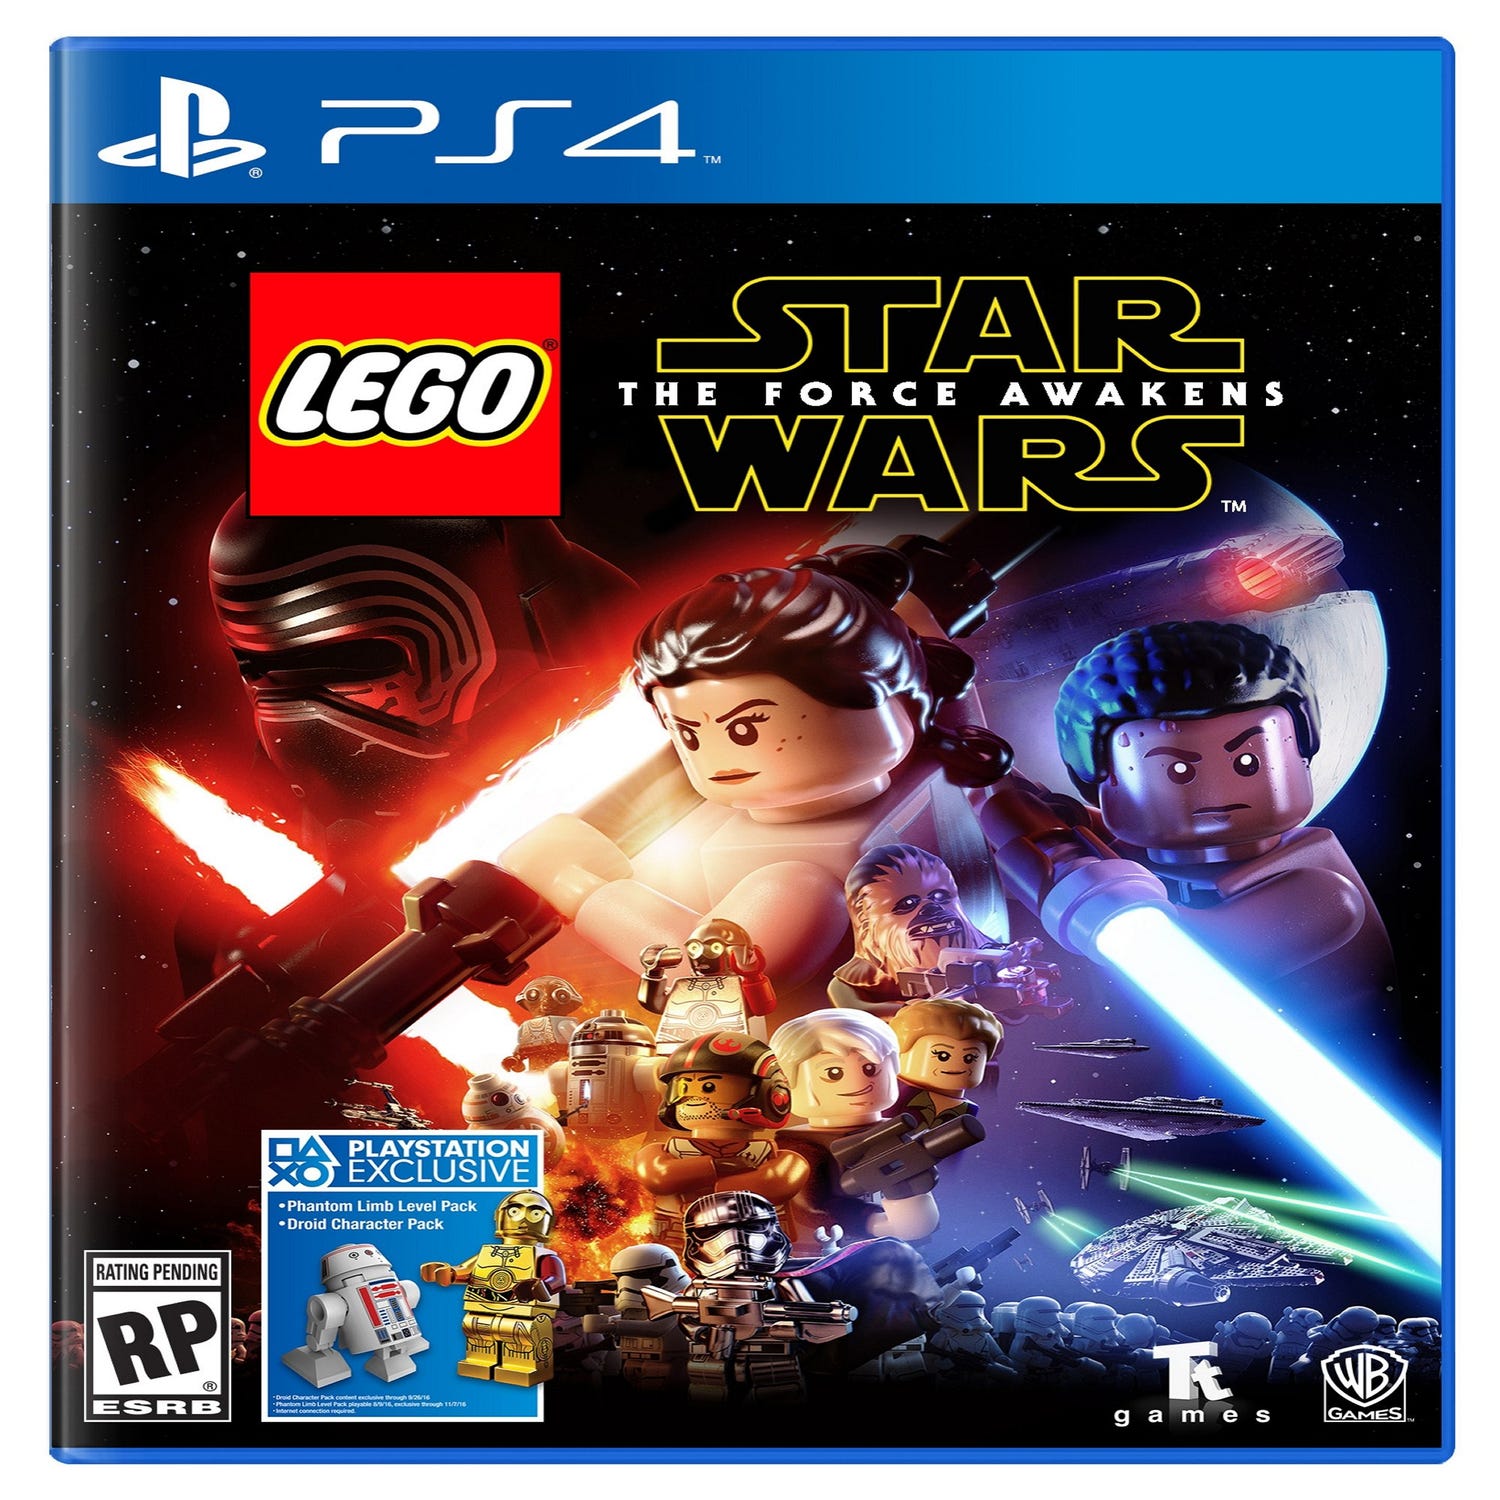 Lego Star Wars The Force Awakens Playstation 4 Video Game Star Wars Buy Online At The Official Lego Shop Us